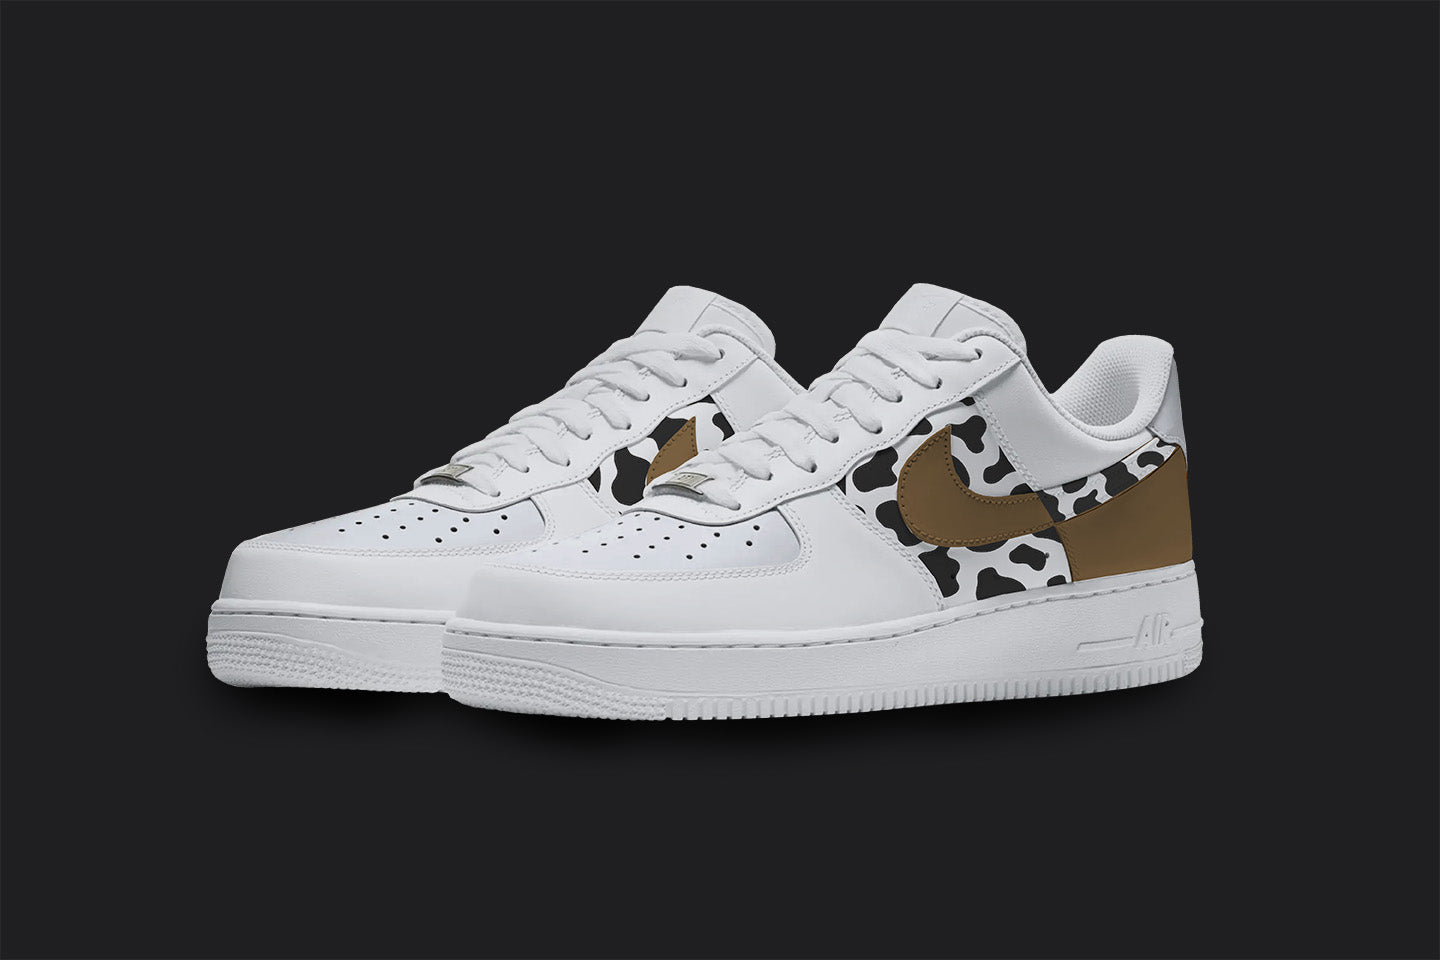 The image is of a Custom Nike Air force 1 sneaker on a blank black background. The custom sneaker pair is painted in a black and brown cow print. 